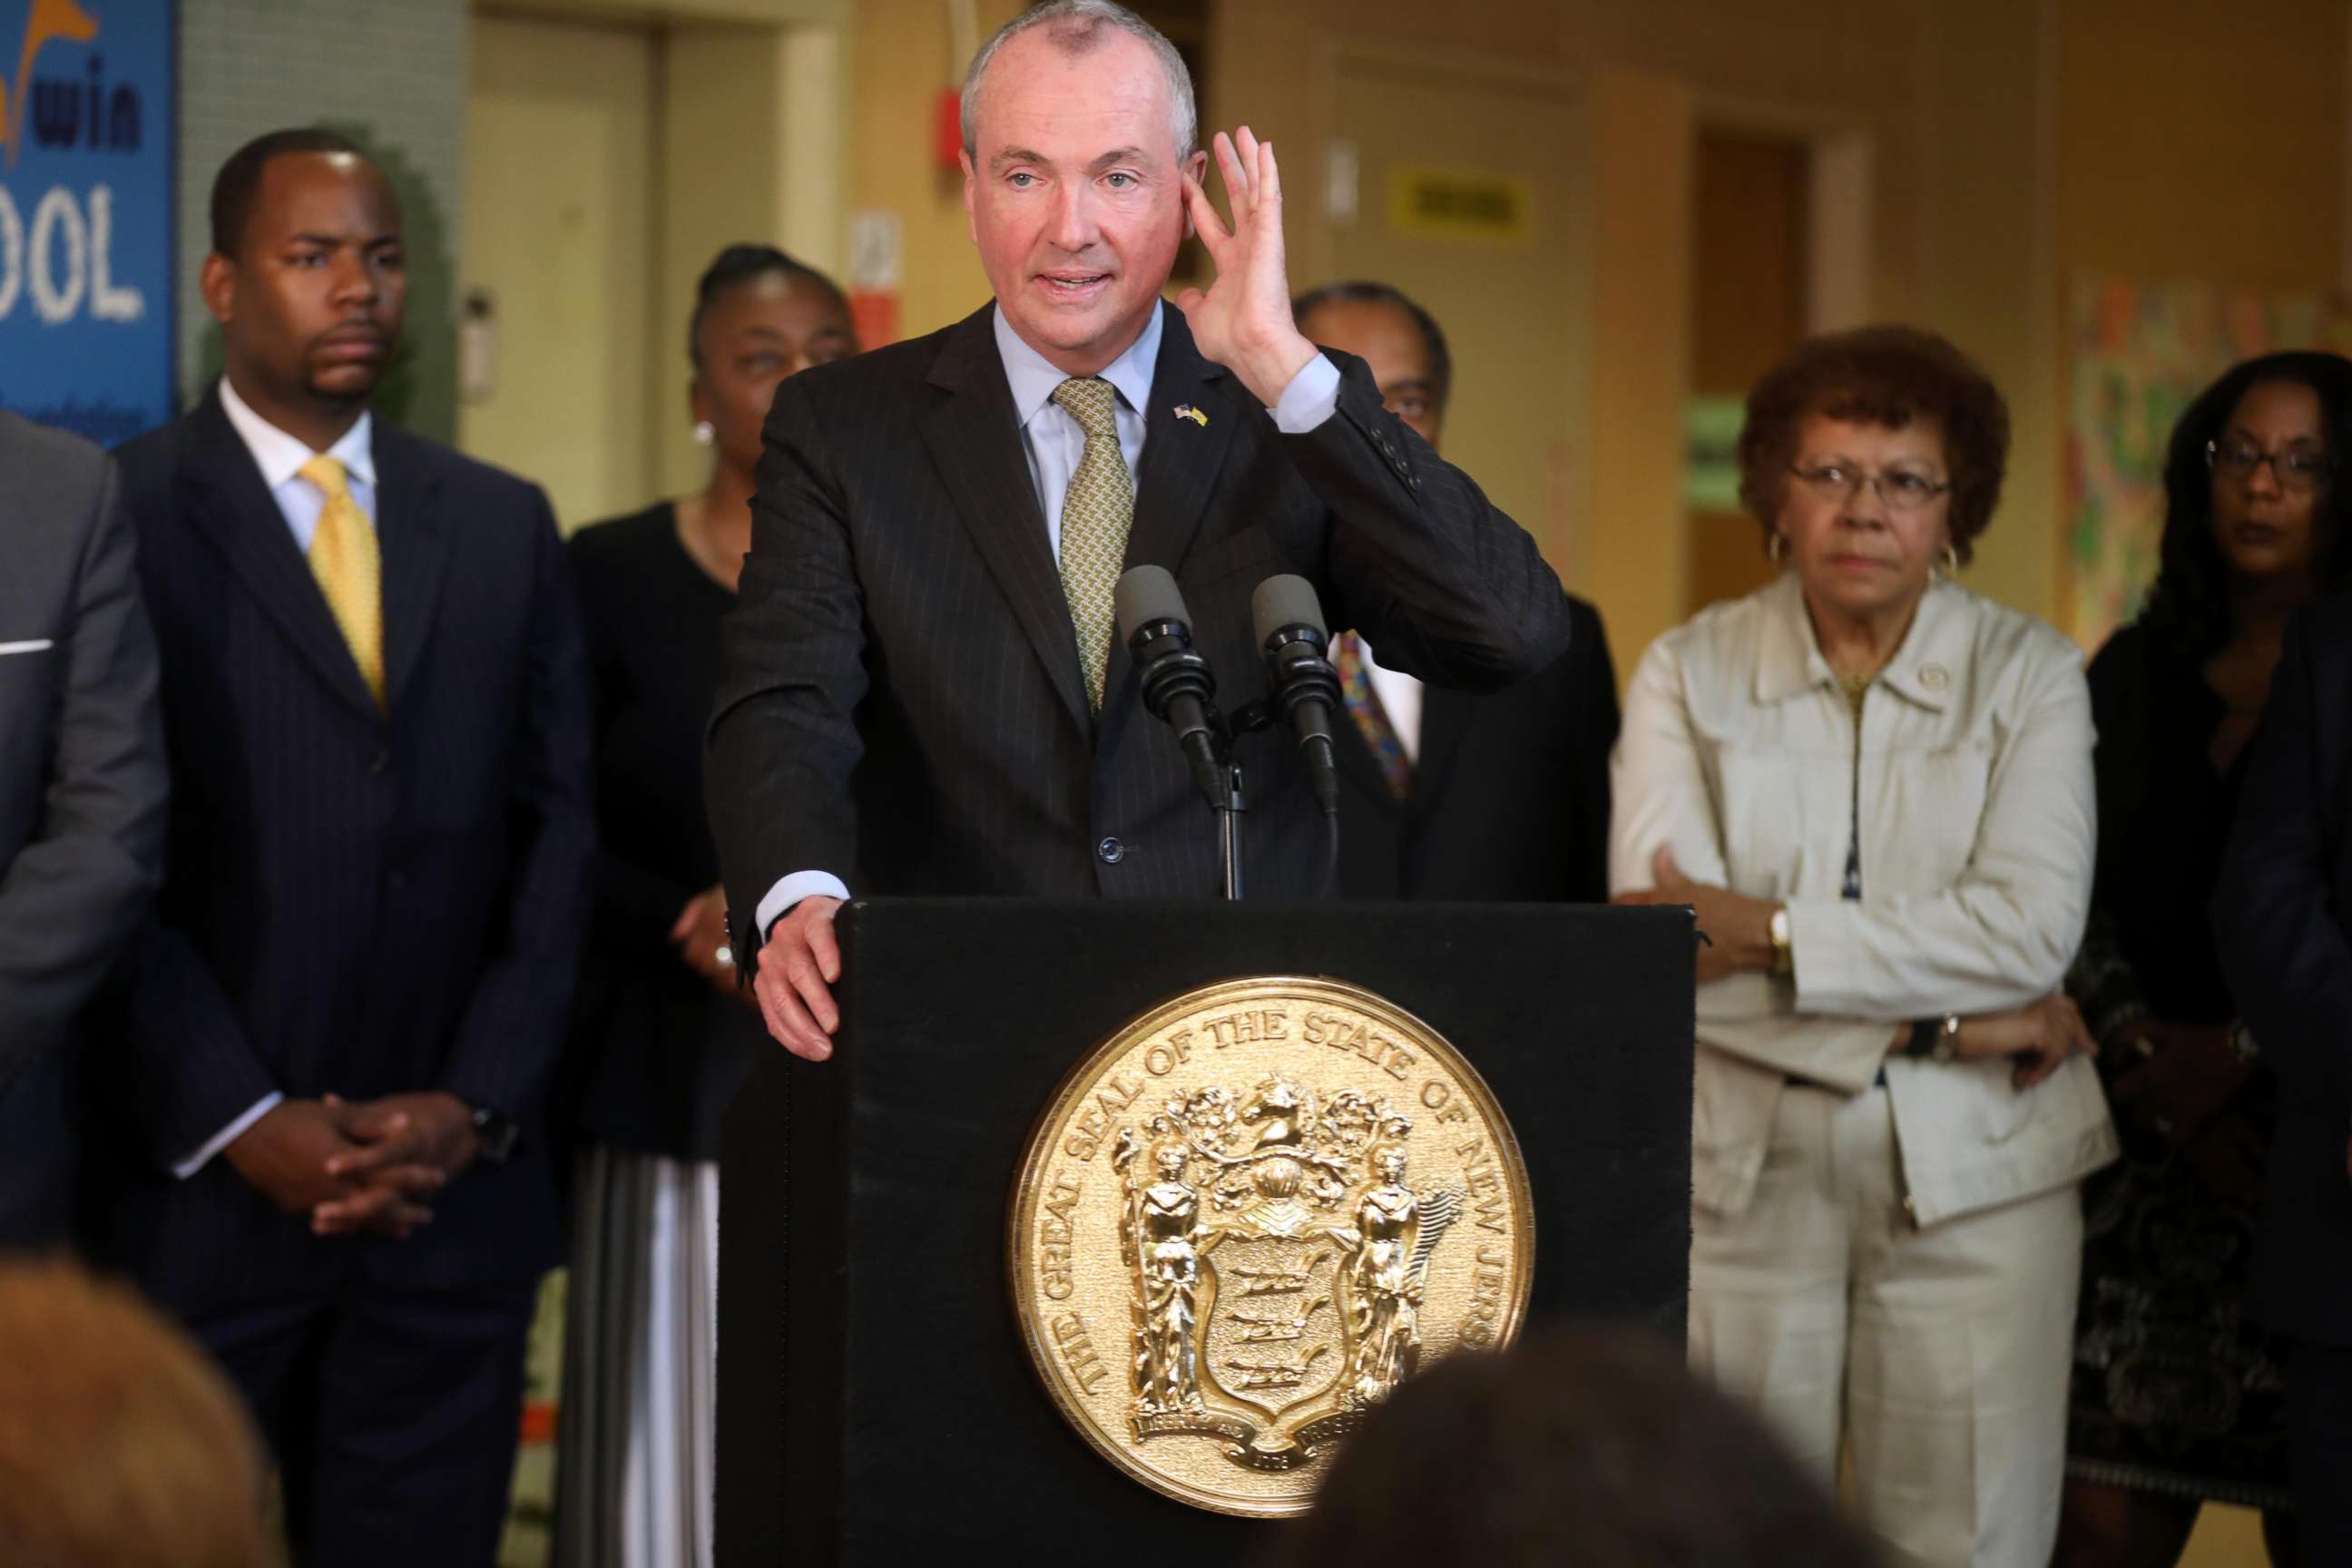 PHOTO: N.J. Governor Phil Murphy during a press conference as he talks about the budget impasse, June 28, 2018, in Trenton, N.J.